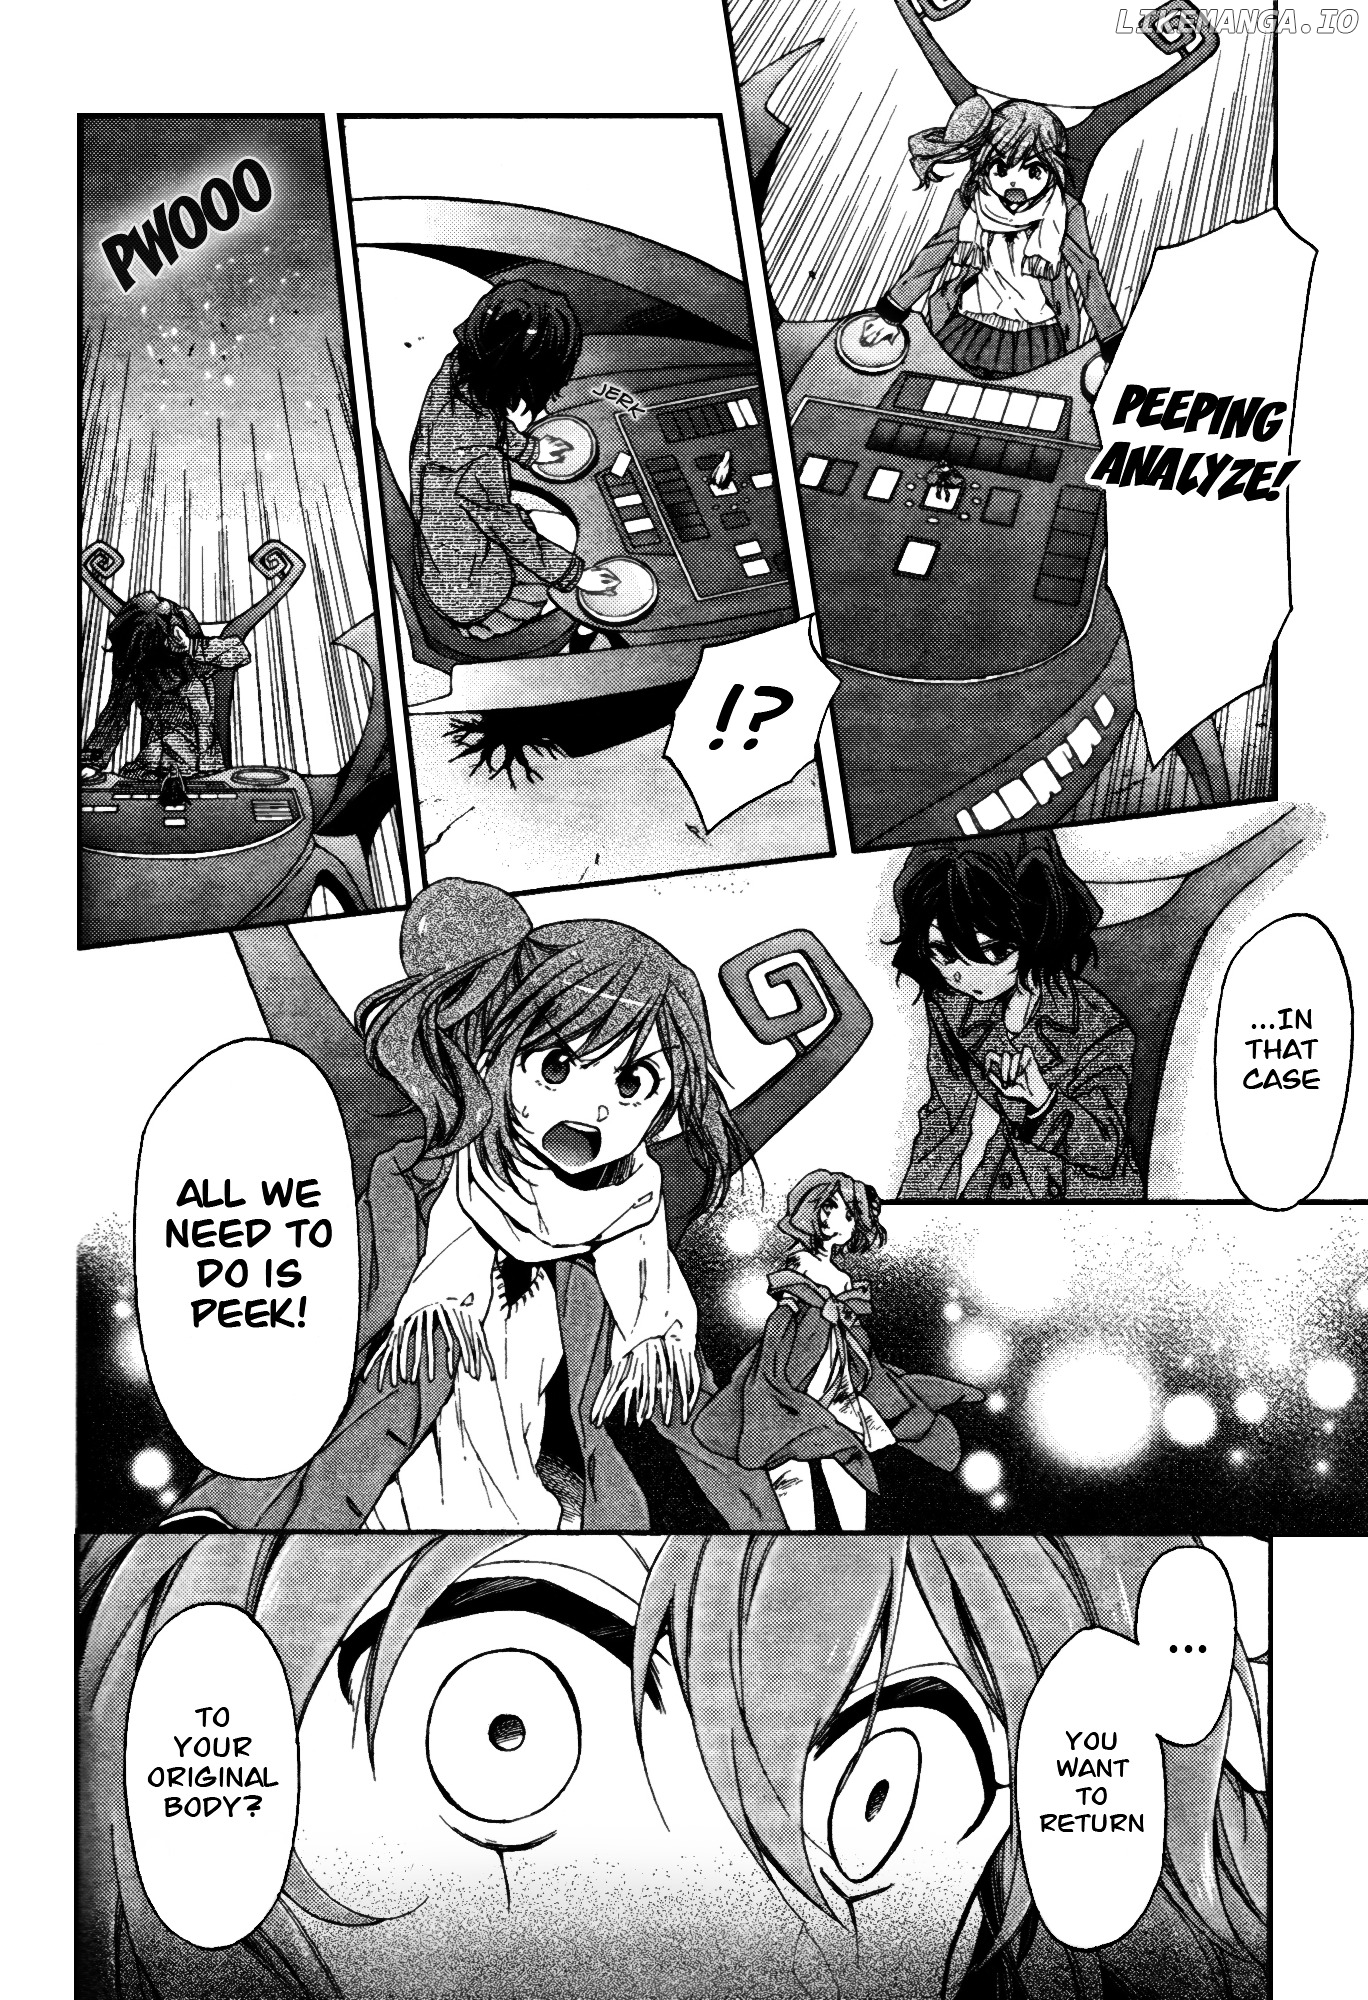 Selector Infected WIXOSS - Peeping Analyze chapter 9 - page 4